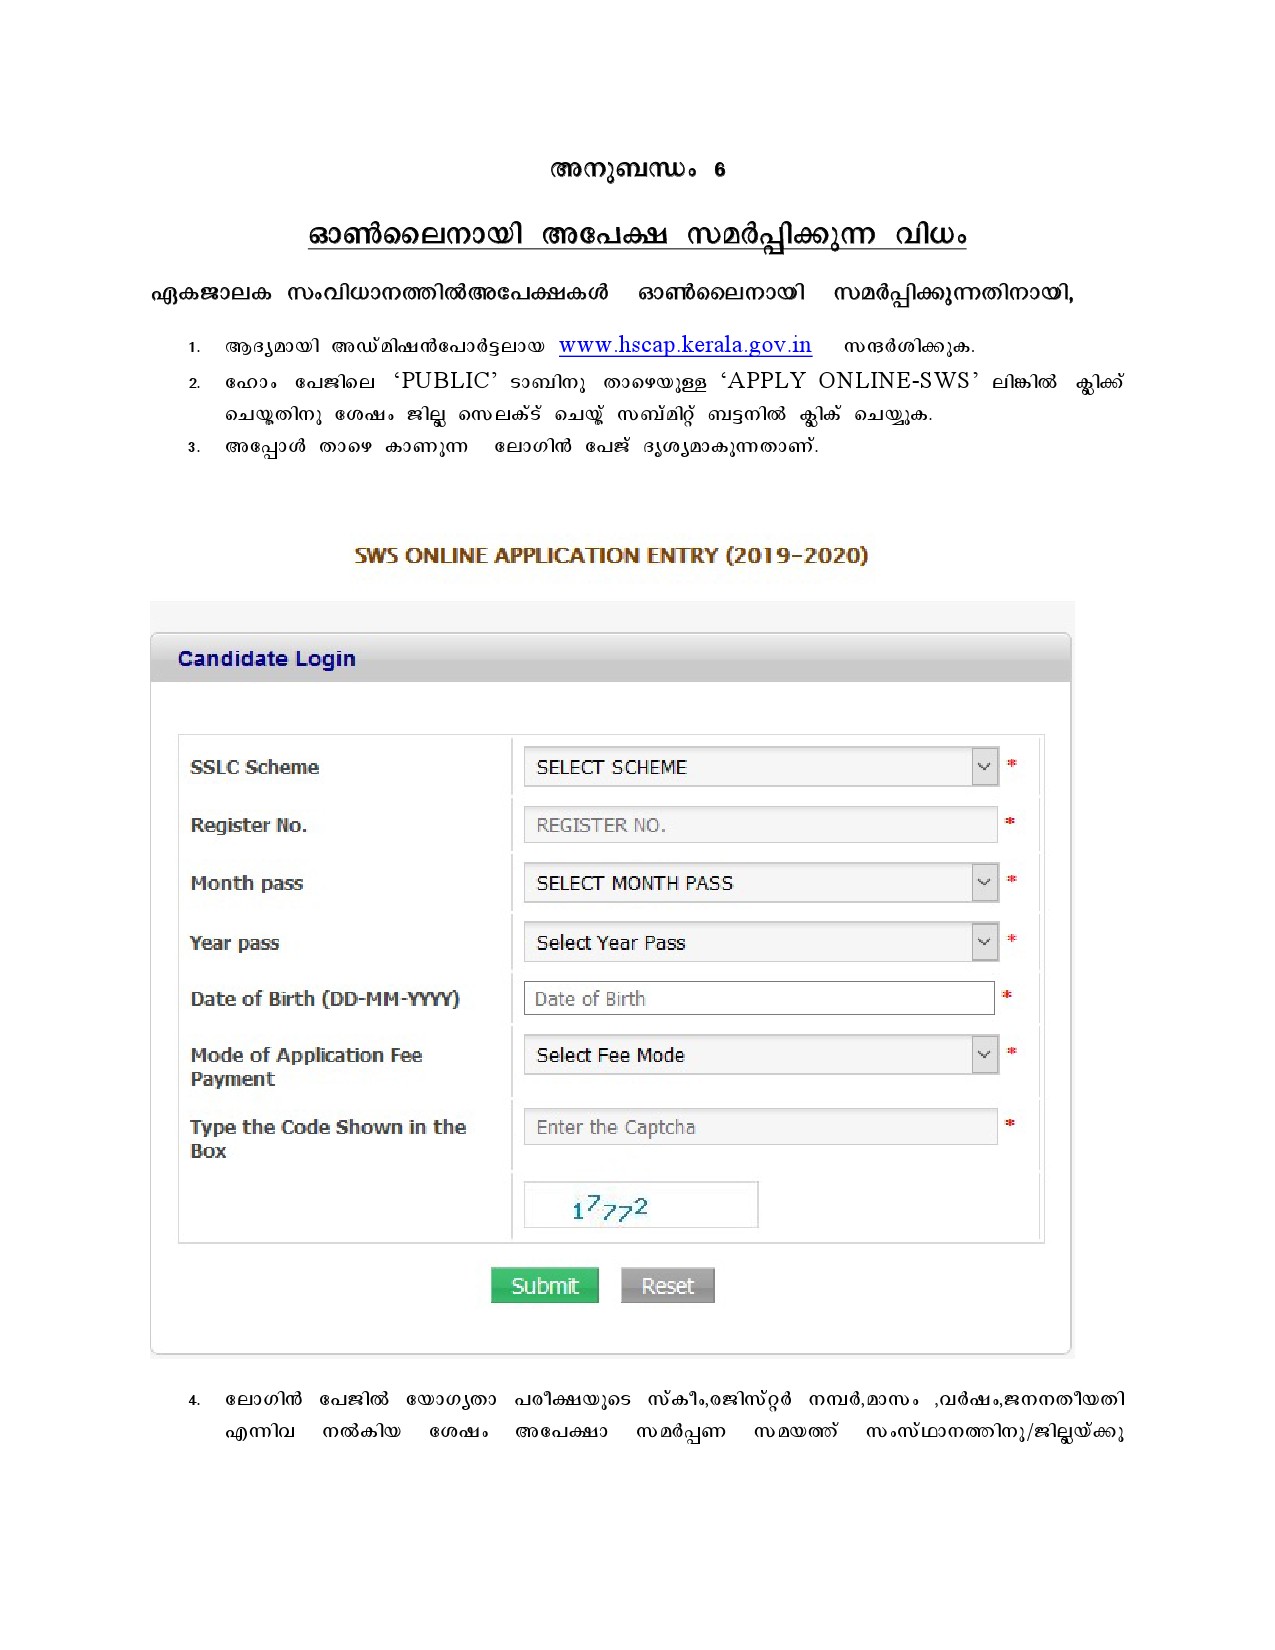 How to Apply Online for Kerala Plus 1 - Notification Image 1